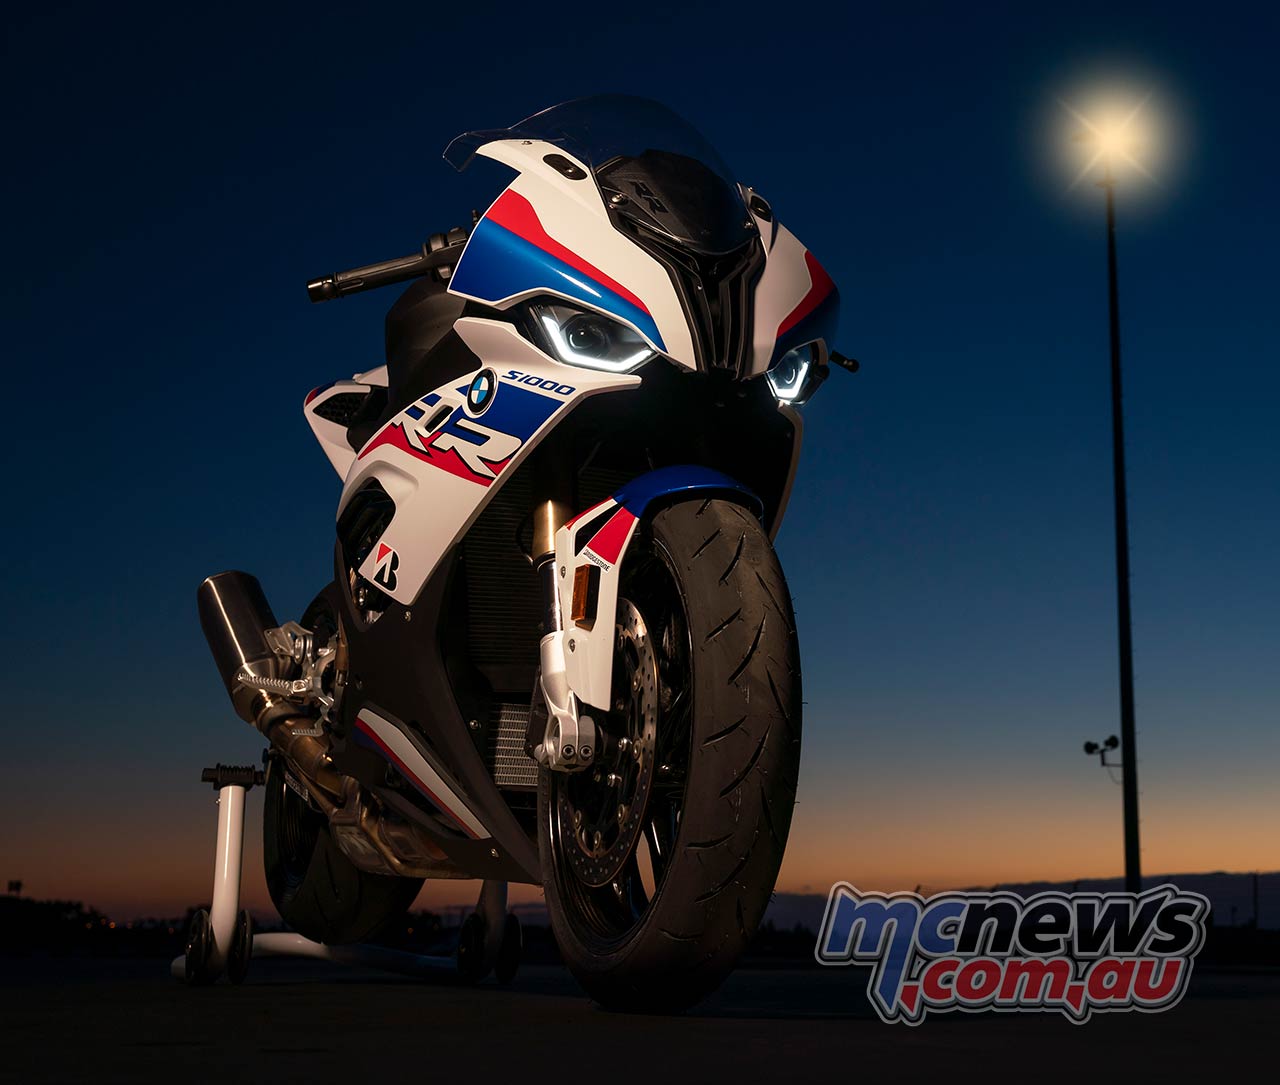 BMW S 1000 RR M Review. Motorcycle Test. Motorcycle News, Sport and Reviews